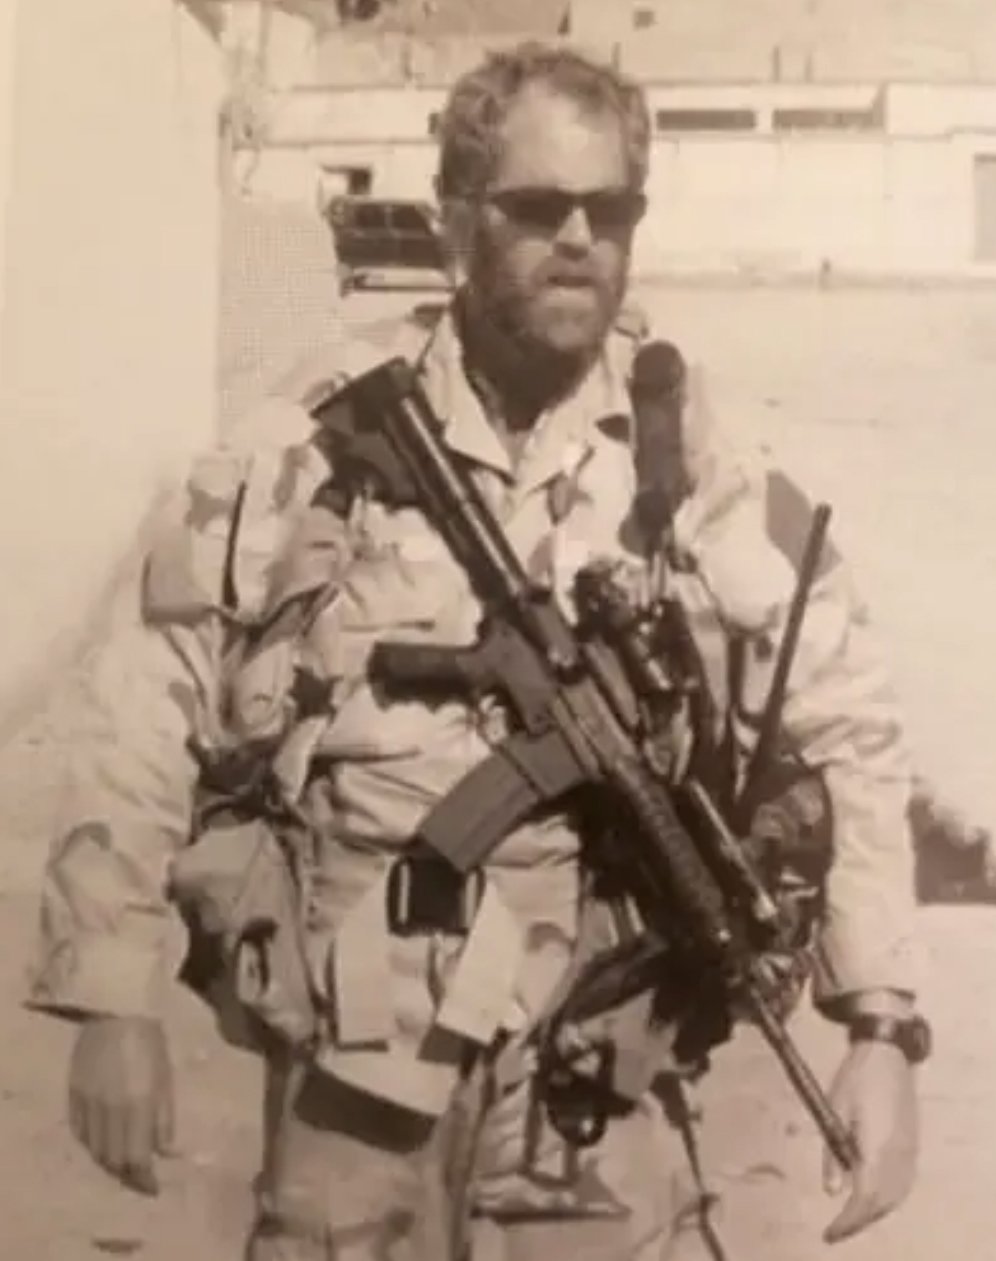 Christopher Miller as a major in Afghanistan (Image found in Eric Blehm’s book “The Only Thing Worth Dying For.”